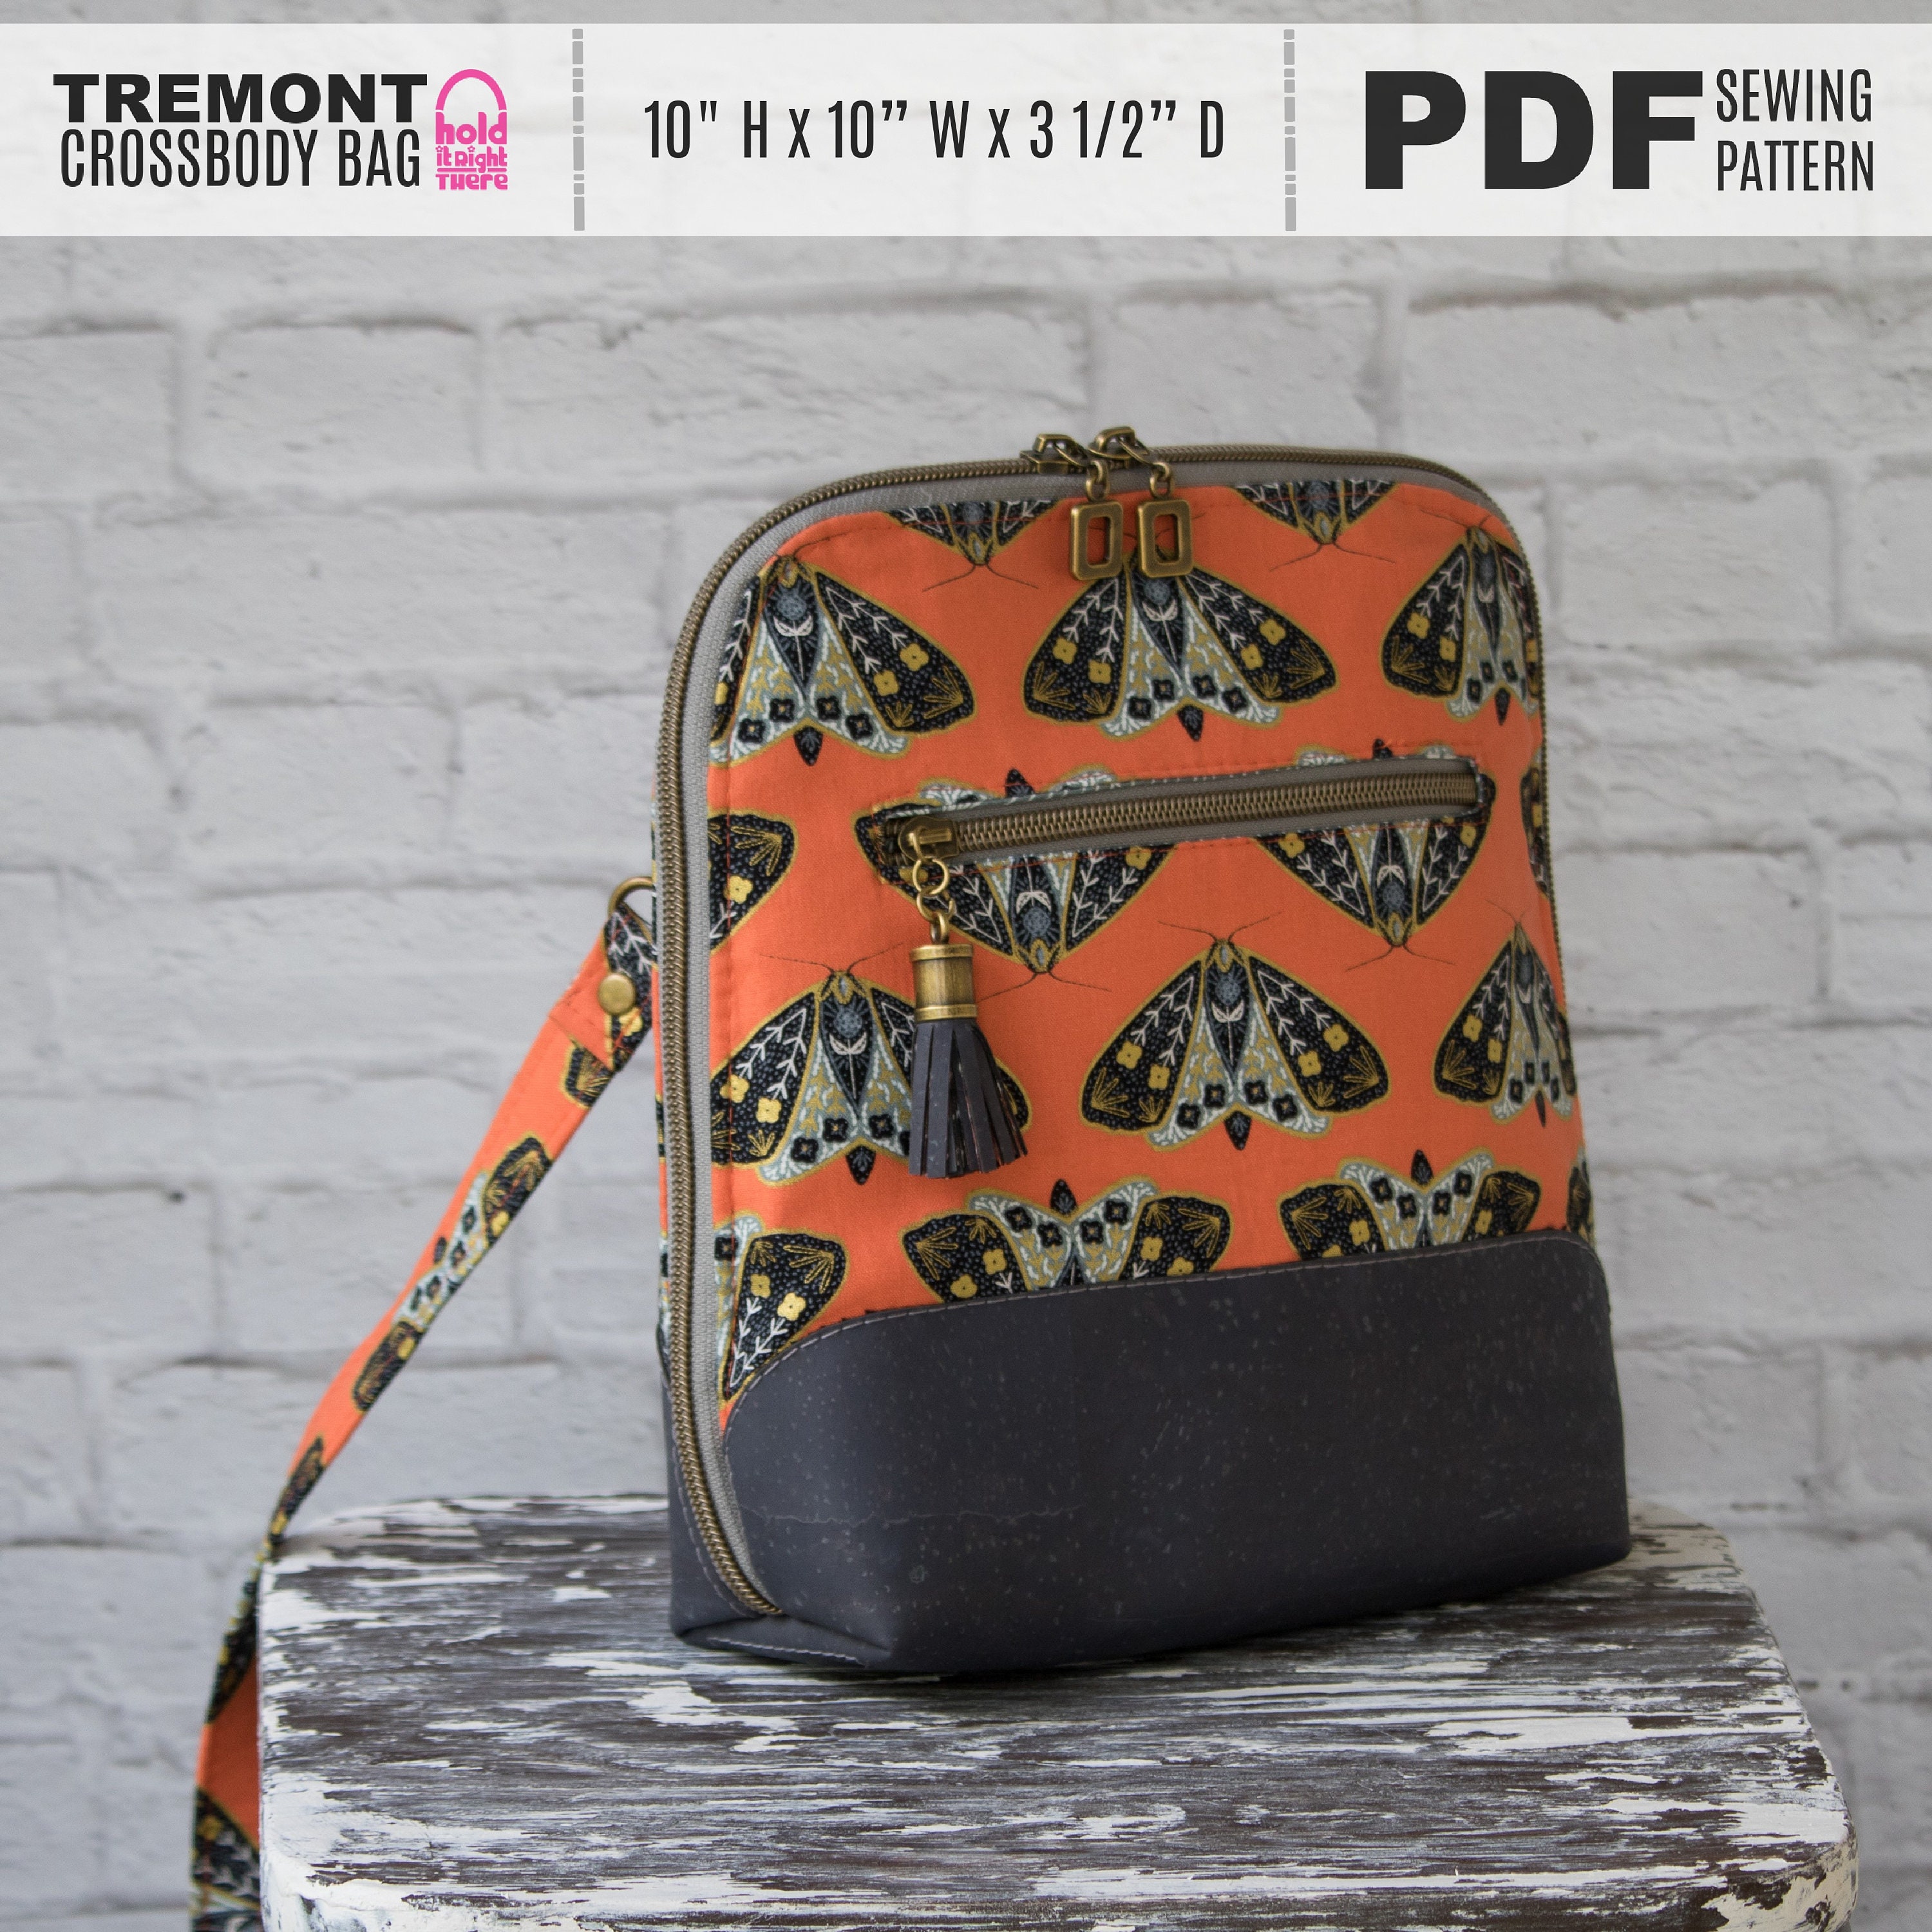 PDF SEWING PATTERN With Tutorial Video Tremont Crossbody 